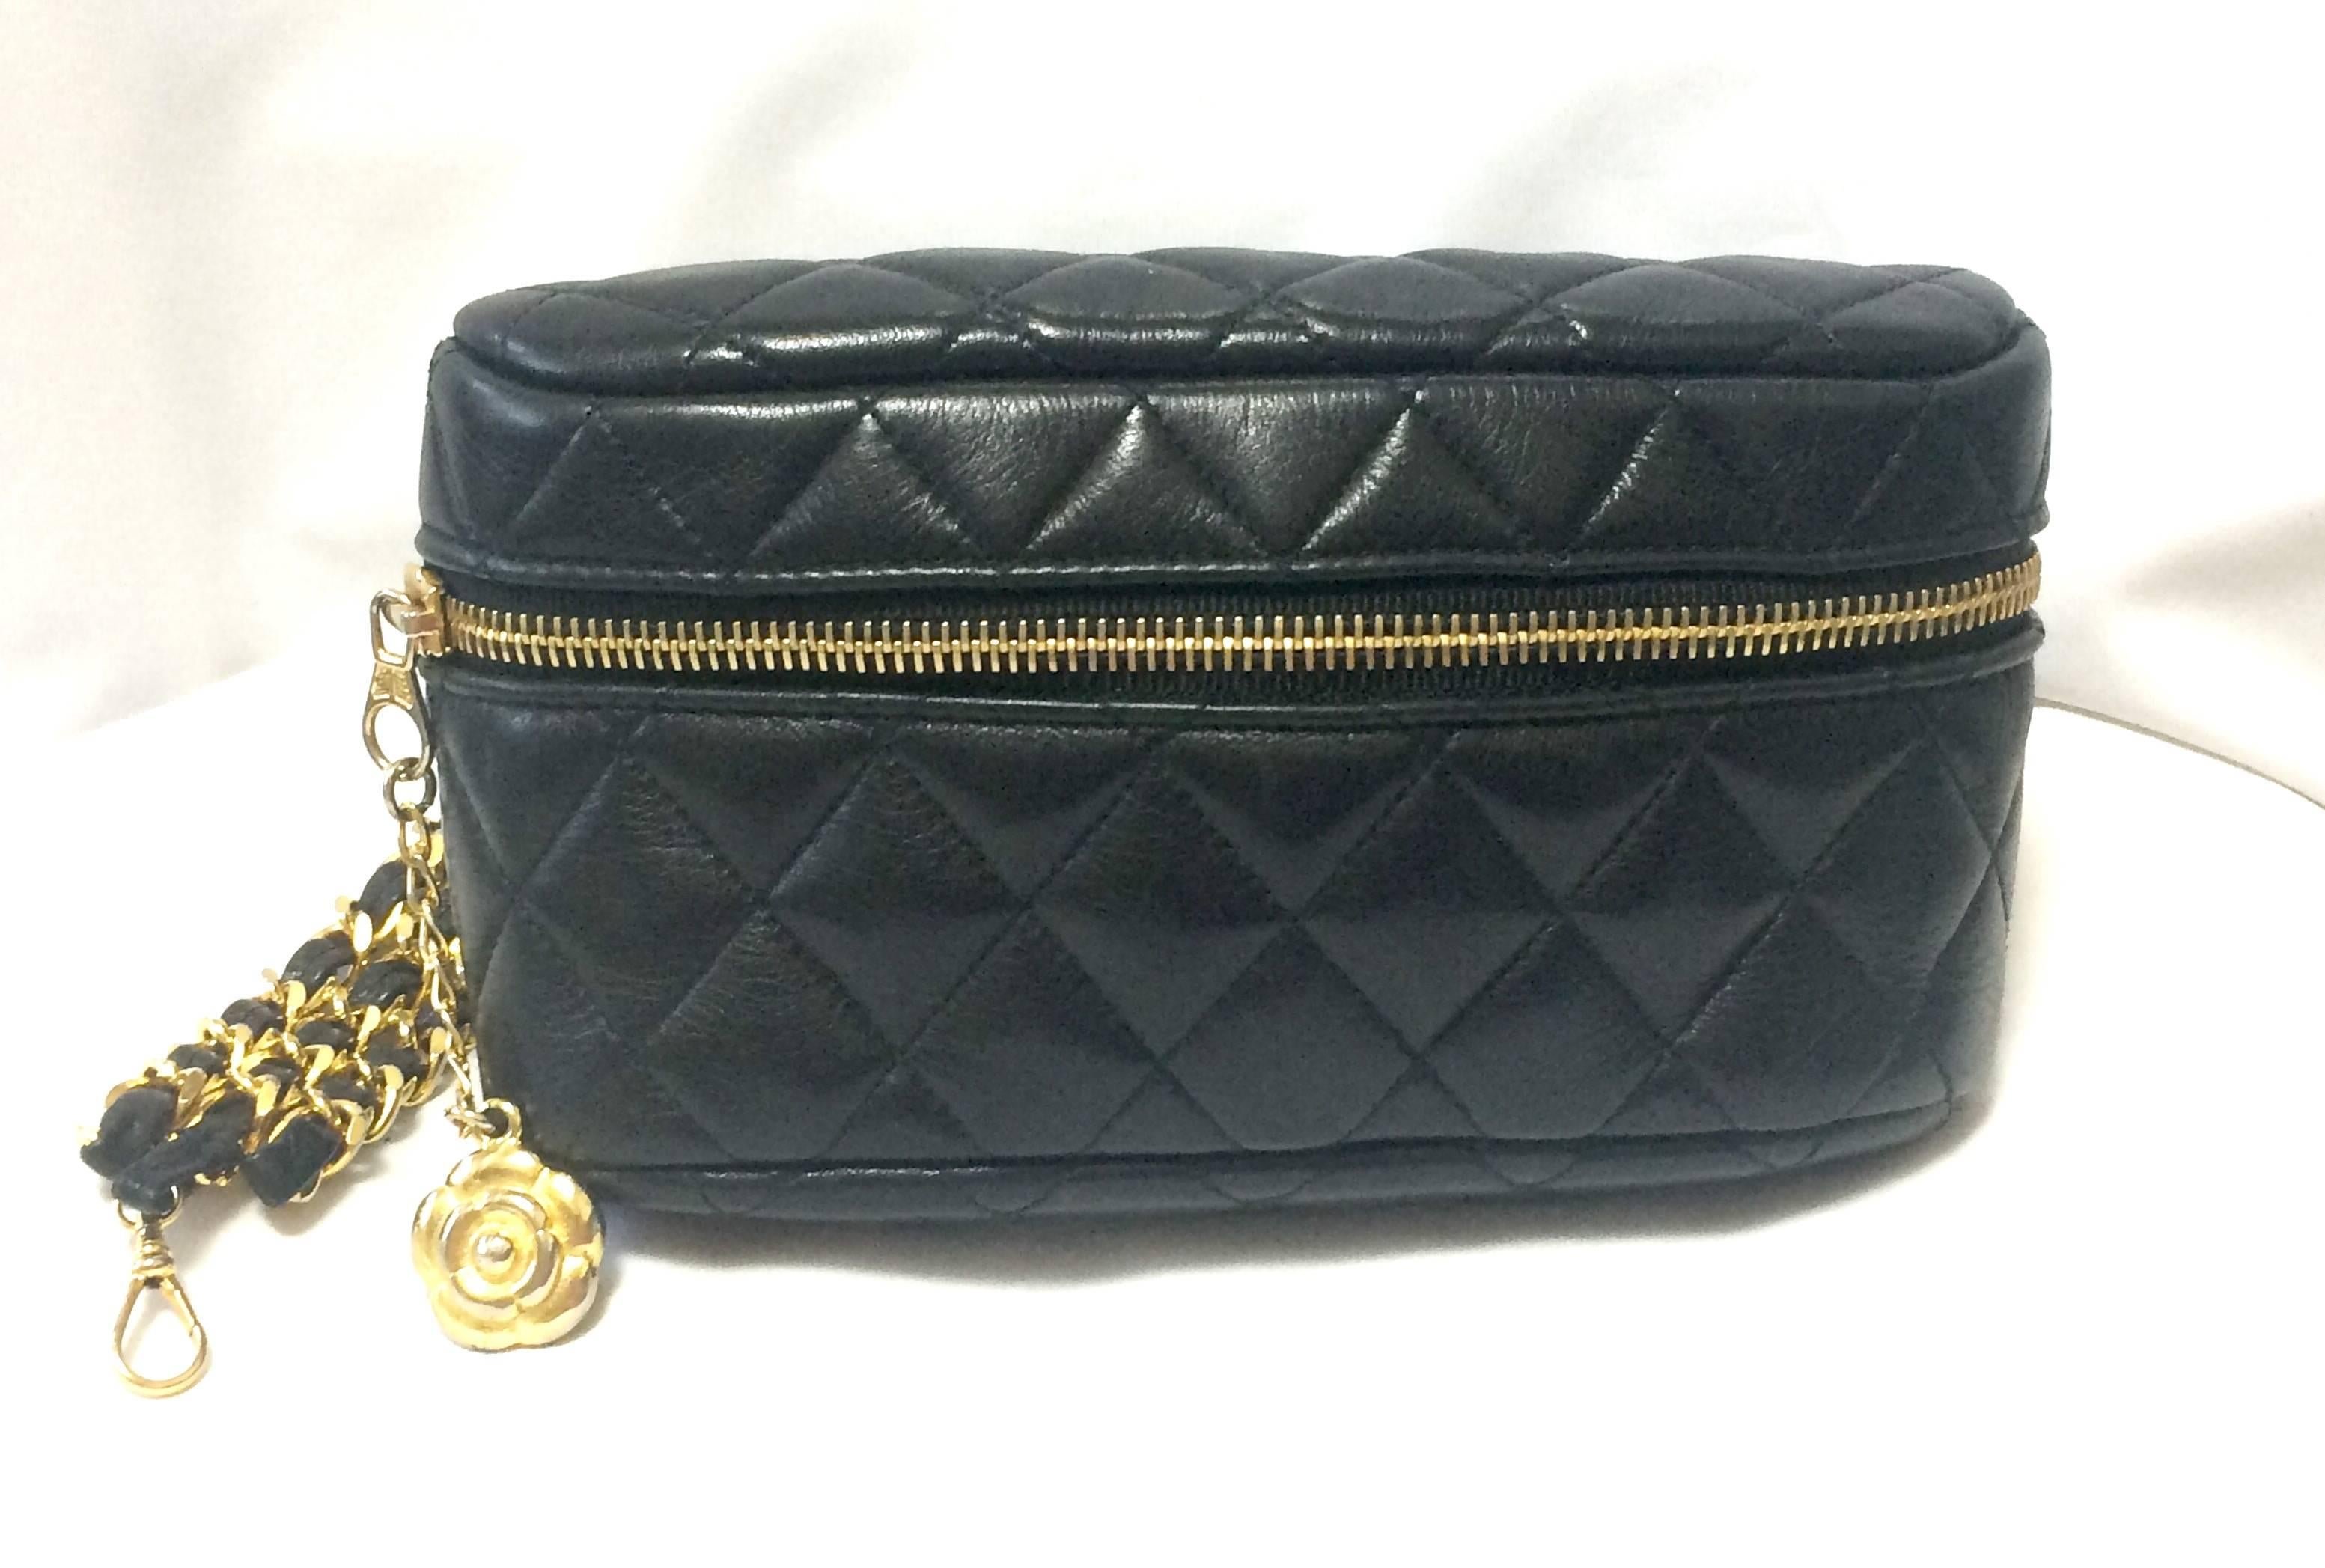 1990s. Vintage CHANEL black leather waist bag, fanny pack with triple chain leather belt and a dangling camelia flower charm. Rare and unique purse for waist size  up to 26